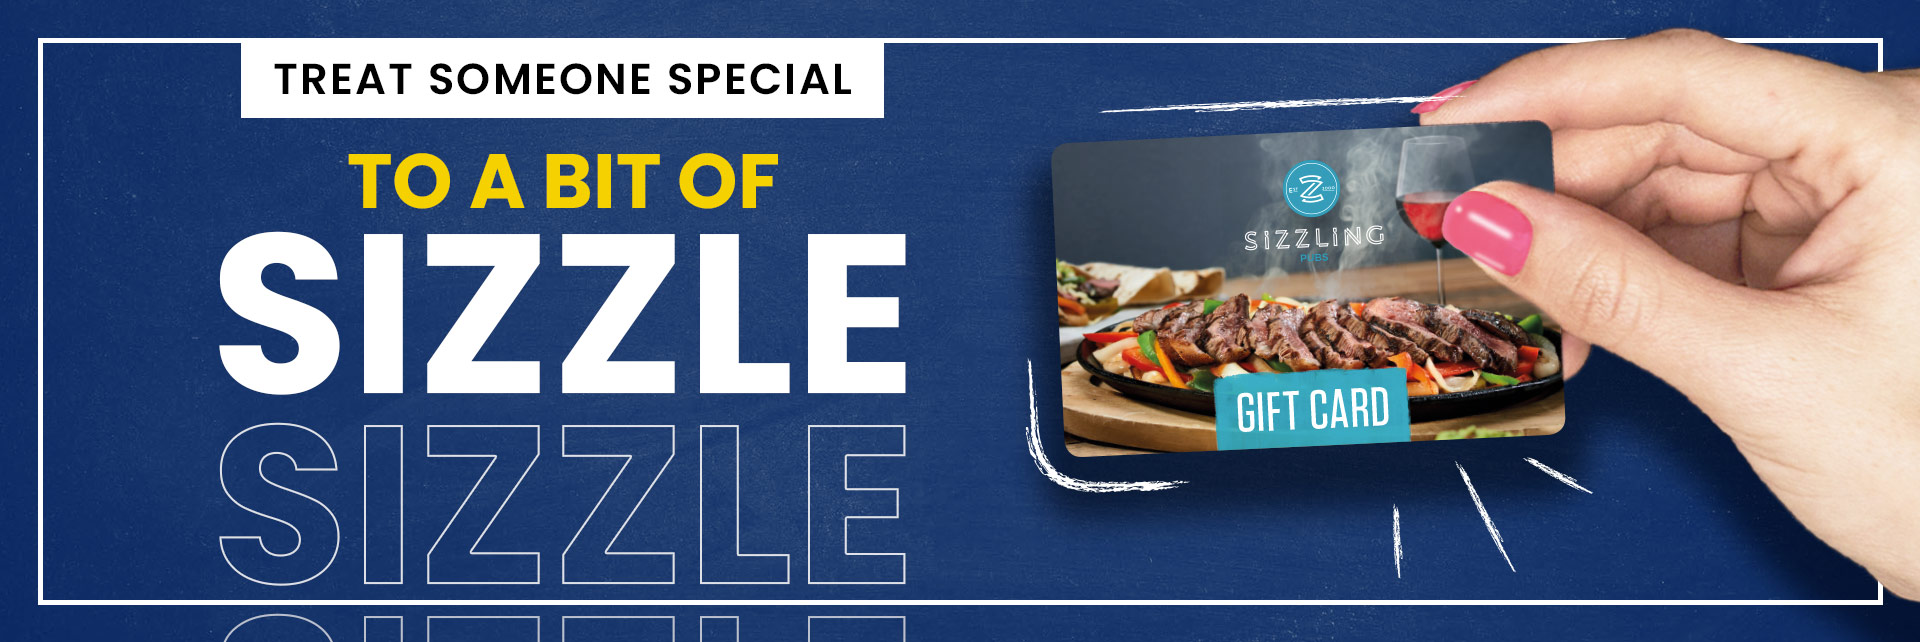 Sizzling Pubs Gift Card at The Chestnut Tree in Wolverhampton